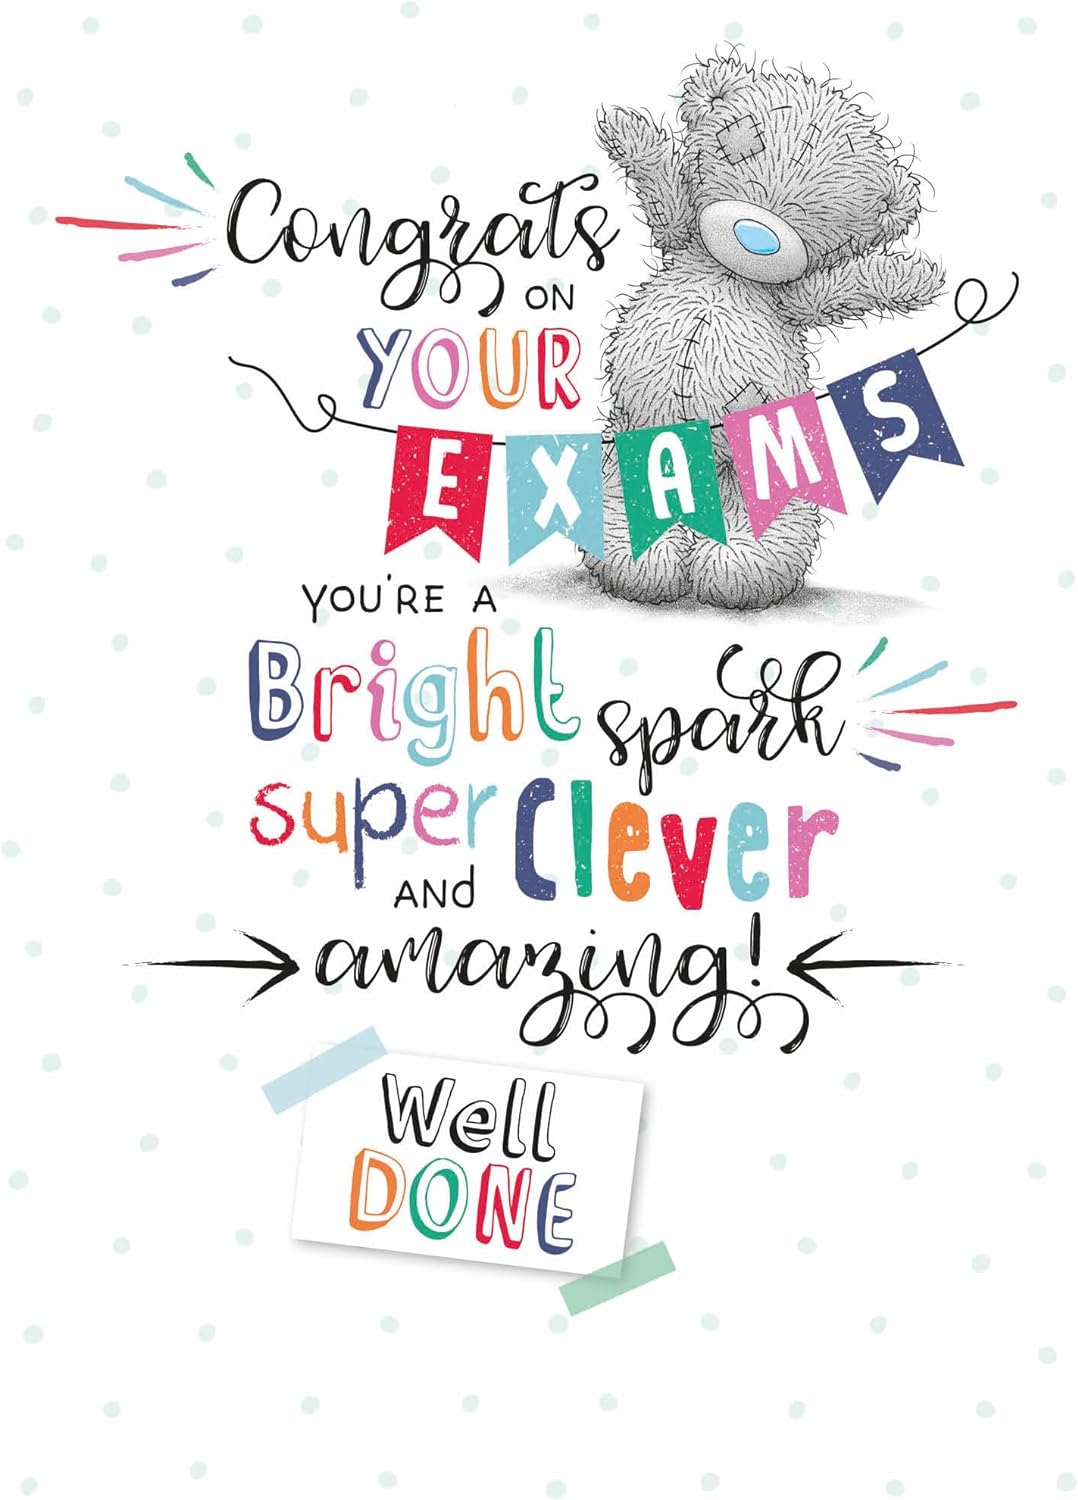 Bear With Arms Up Congrats On Your Exams Greeting Card